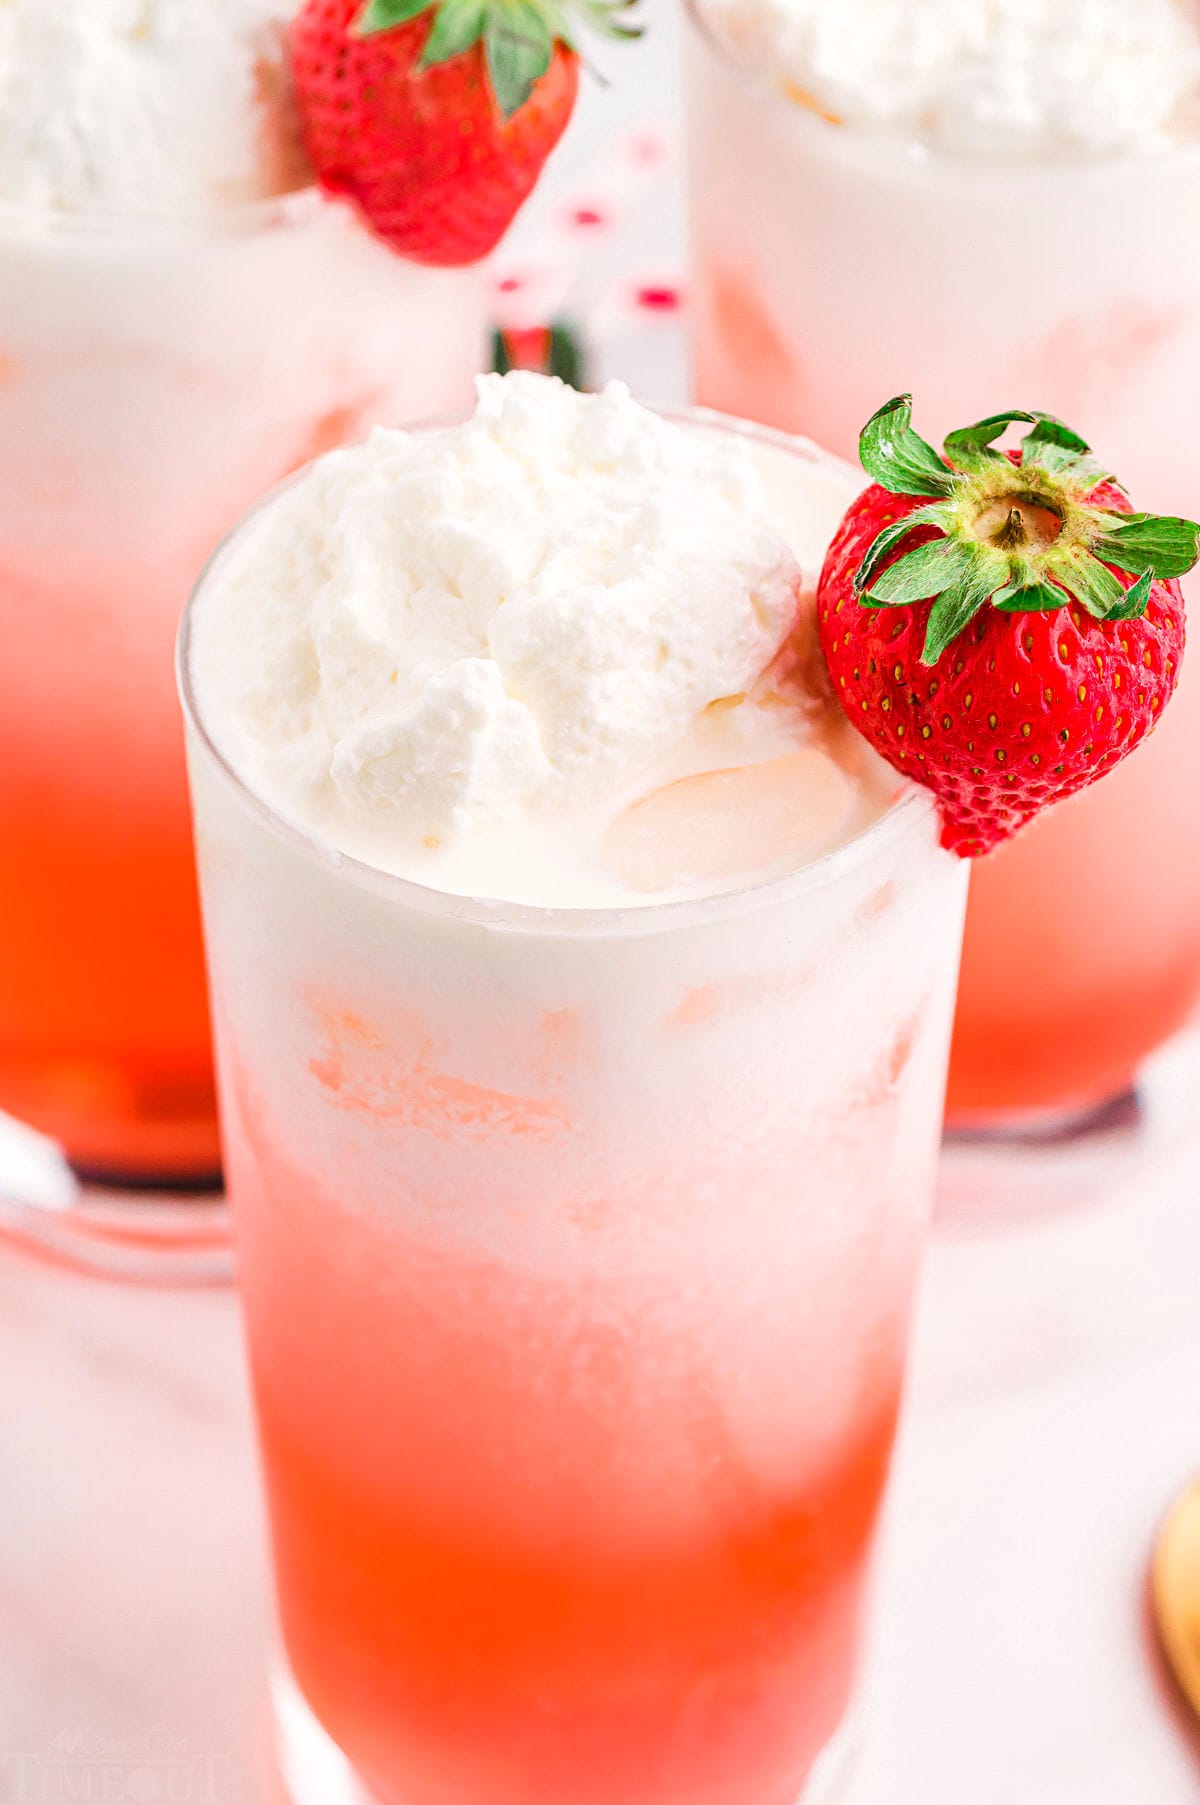 italian cream soda topped with whipped cream and a strawberry.